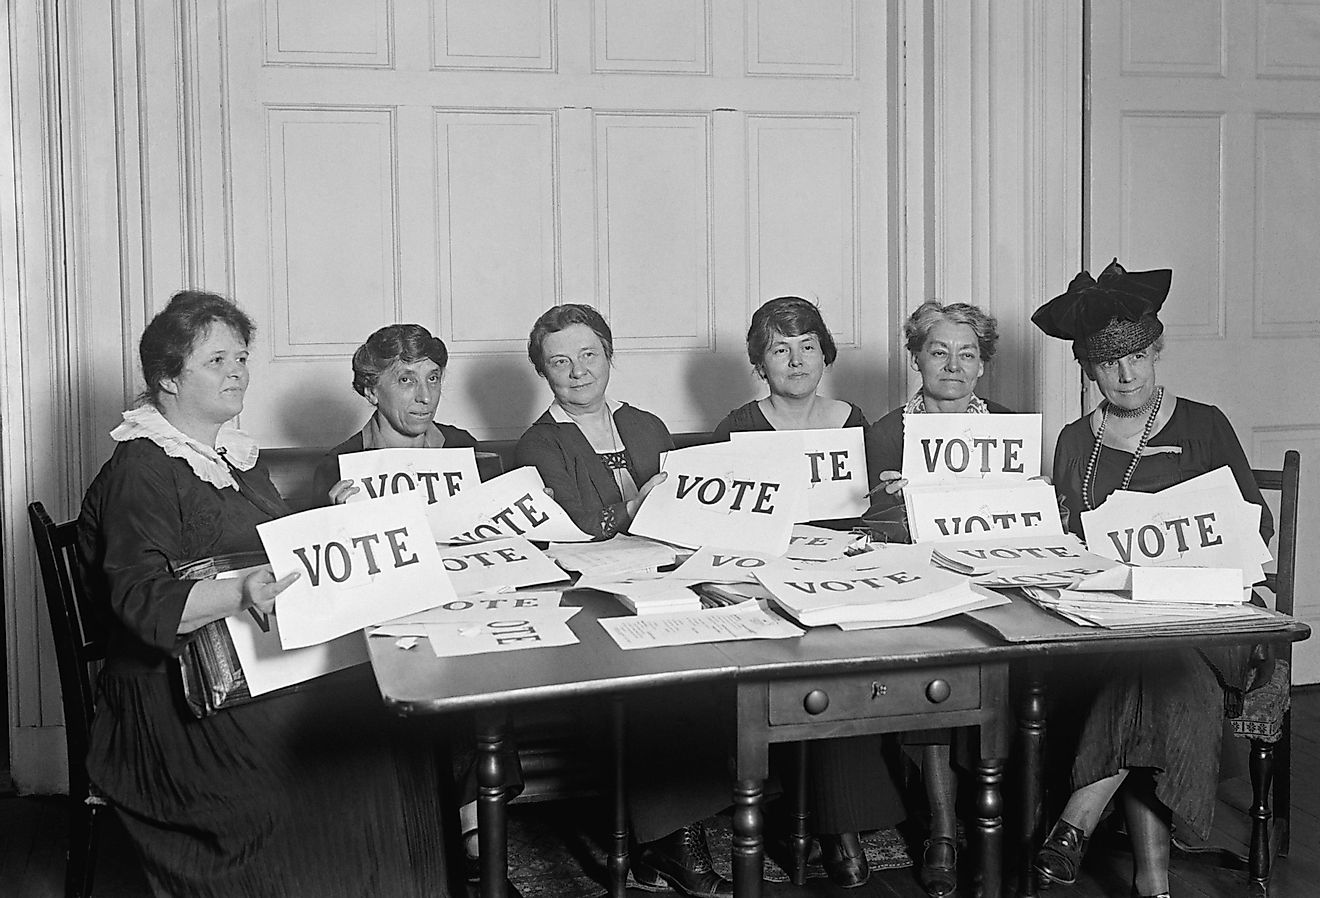 National League of Women Voters hold up signs reading, "VOTE." Image credit Everett Collection via Shutterstock